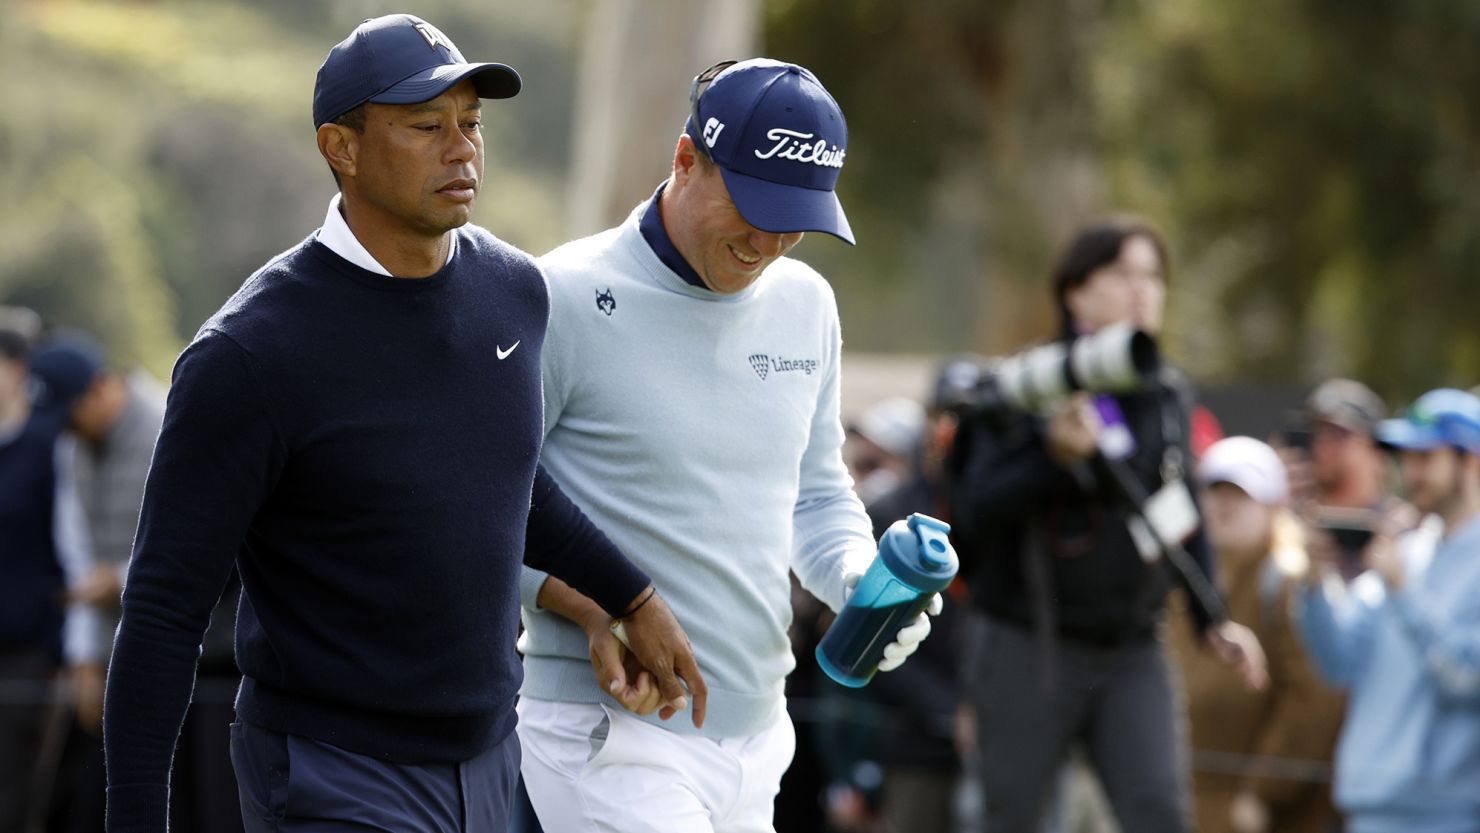 Tiger Woods apologizes after handing Justin Thomas a tampon at the